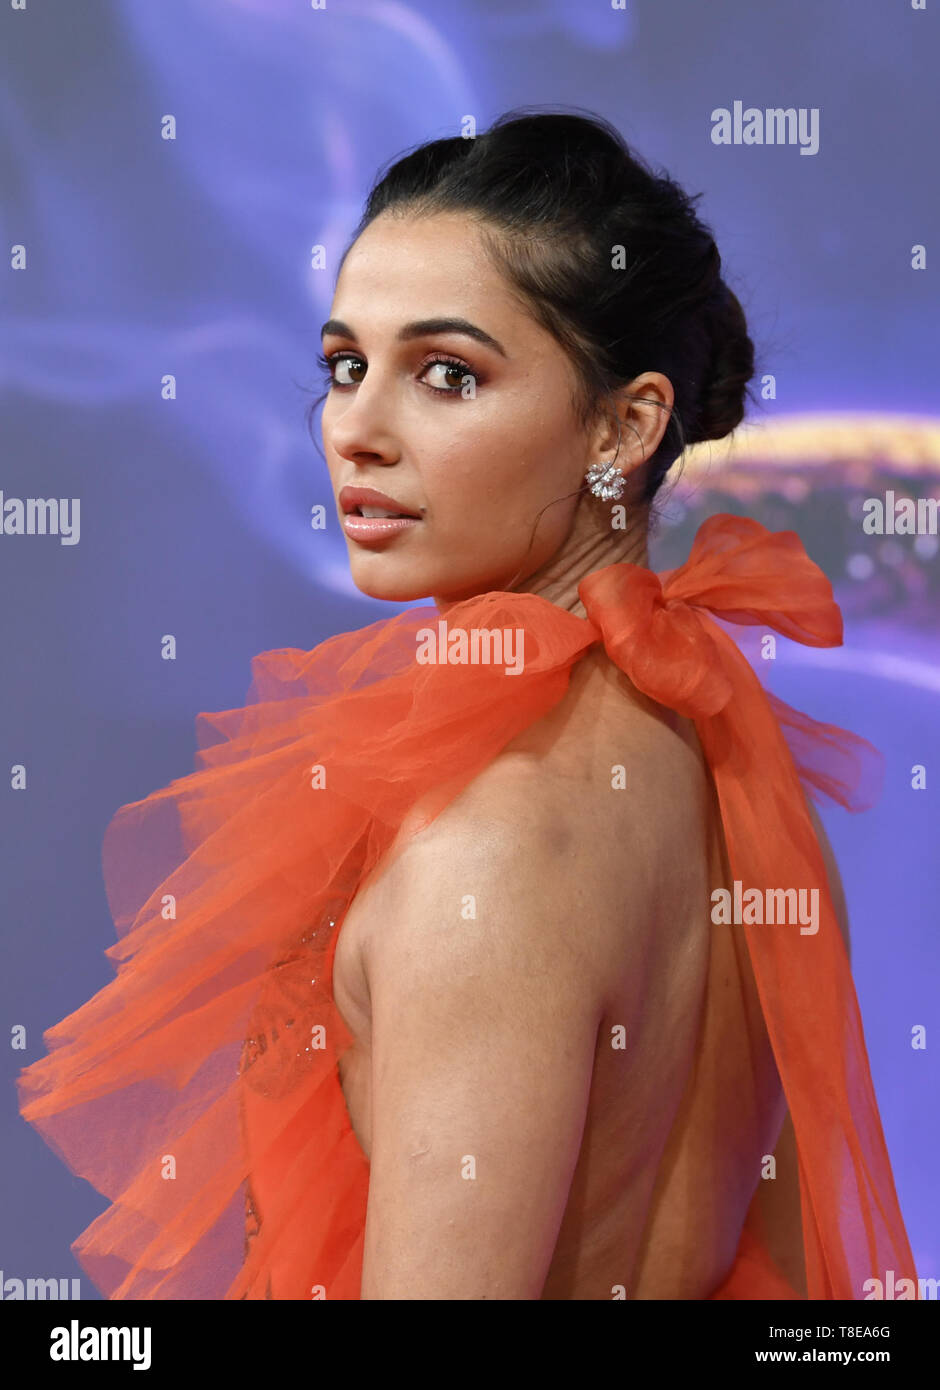 Berlin, Germany. 11th May, 2019. Actress Naomi Scott at the gala screening of the film 'Aladdin' at the cinema UCI Luxe Mercedes Square. The film will be released in German cinemas on 23.05.2019. The new Disney film is a real film adaptation of the 1992 cartoon of the same name and is based on the story Aladdin and the magic lamp from the fairy tales of 1001 Nights. Credit: Jens Kalaene/dpa-Zentralbild/dpa/Alamy Live News Stock Photo